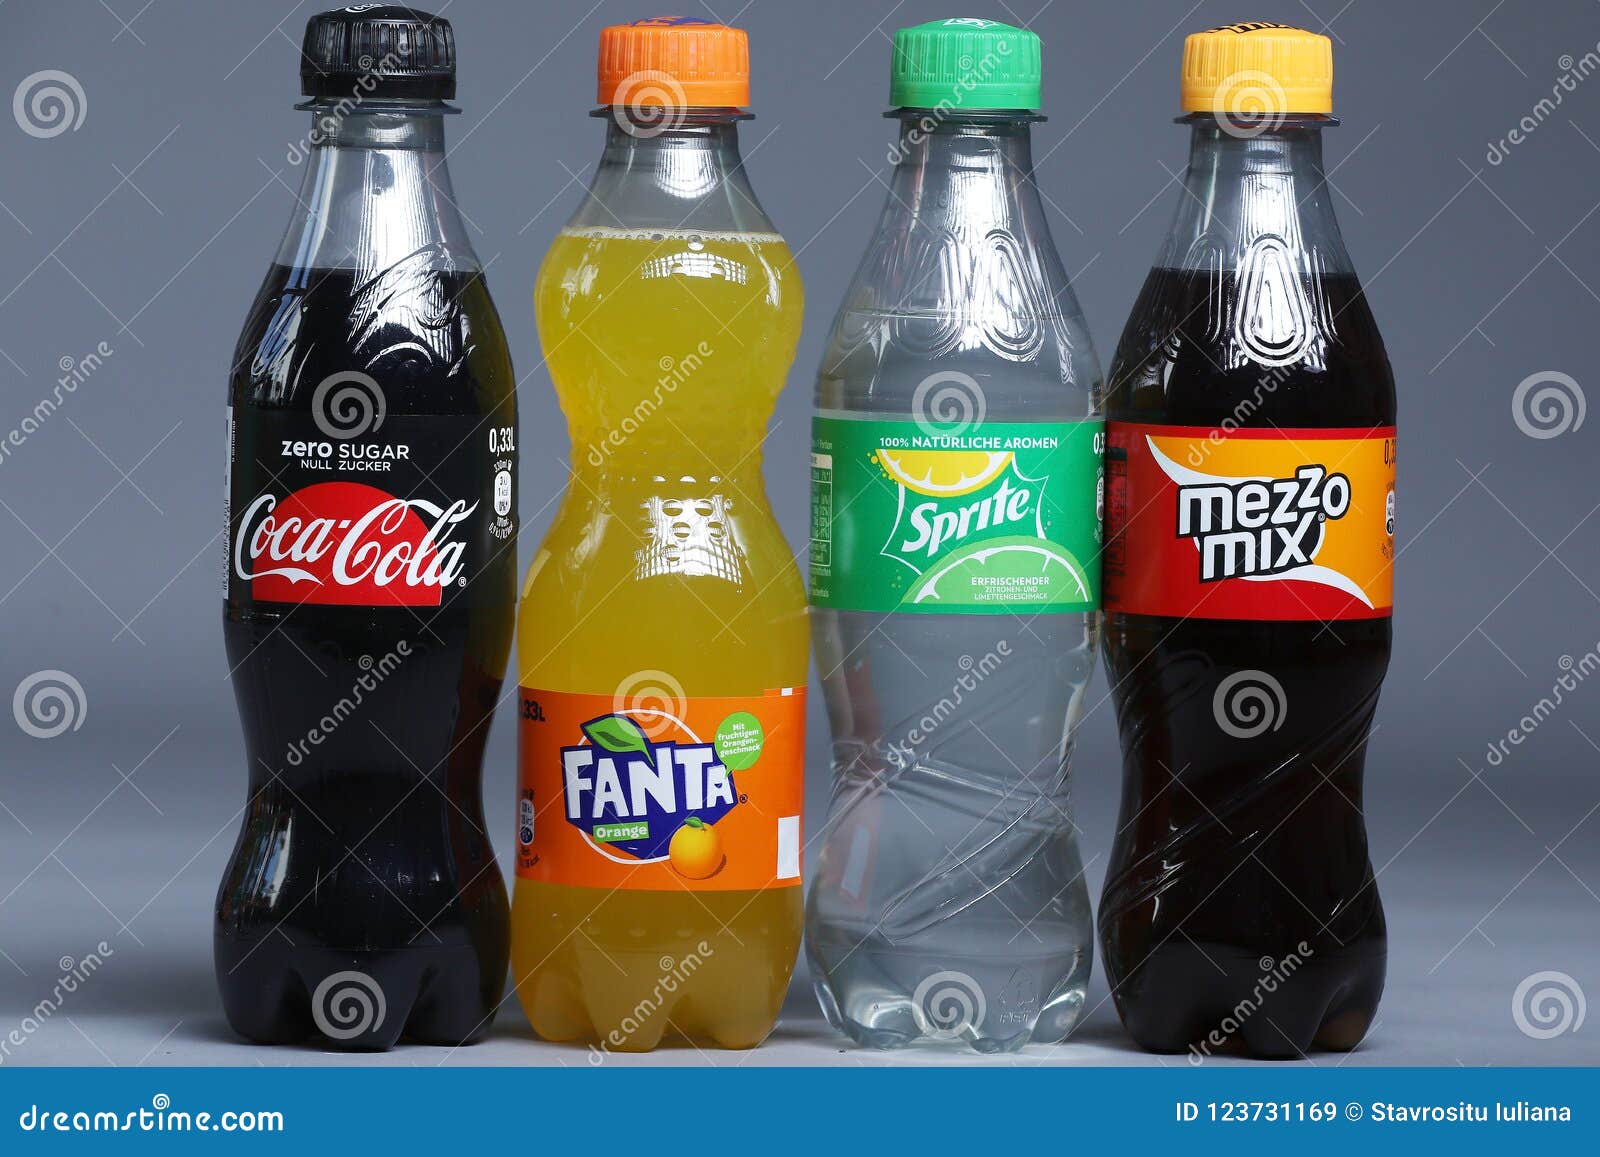 Mix Editorial of Fanta, drinking, drinks: Bottles Stock Cola, Drinks Sprite Image - Image of 123731169 and Mezzo